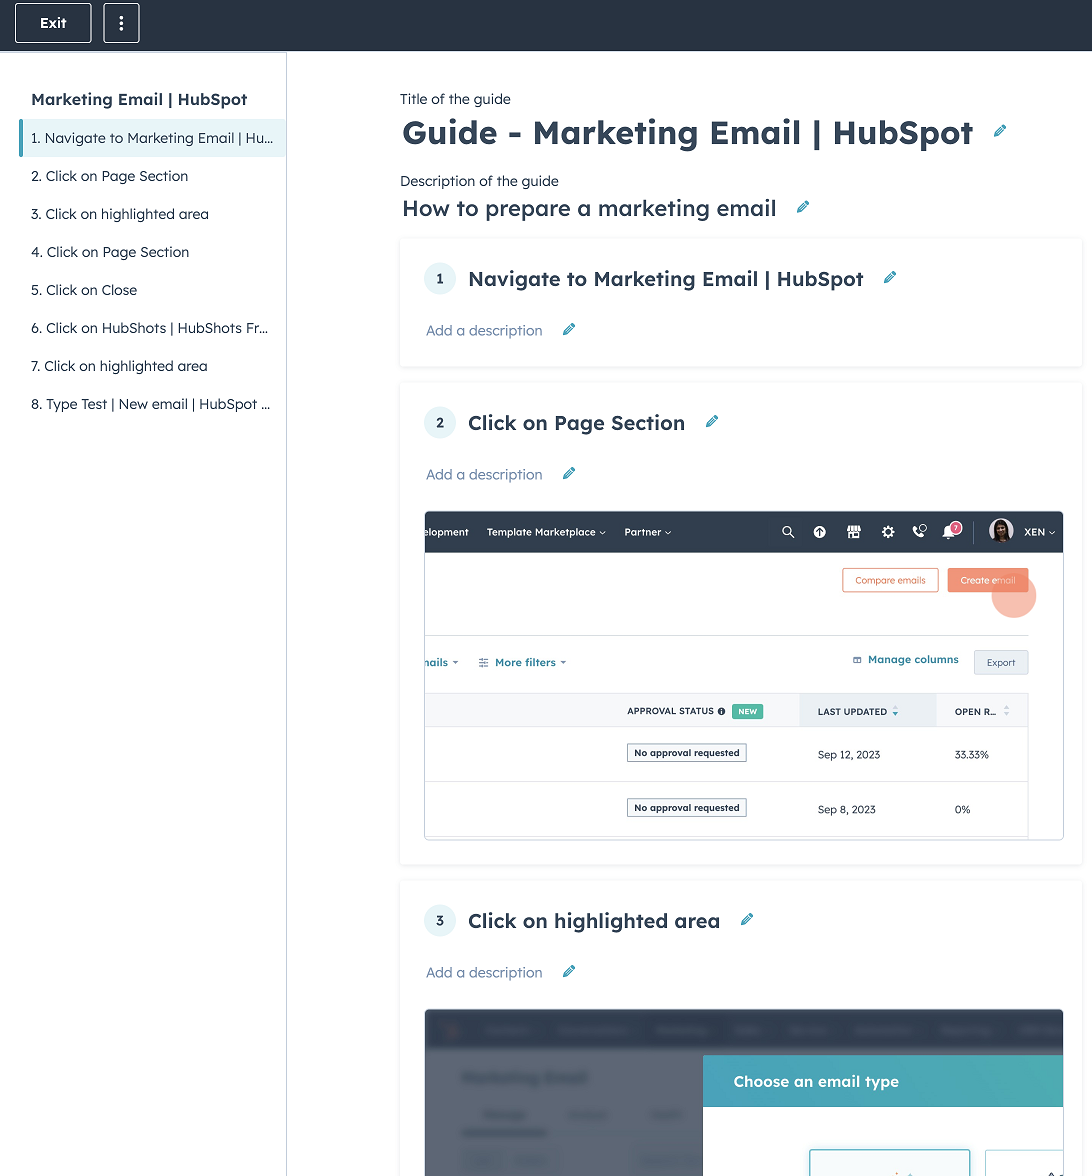 Guide to creating marketing emails in HubSpot